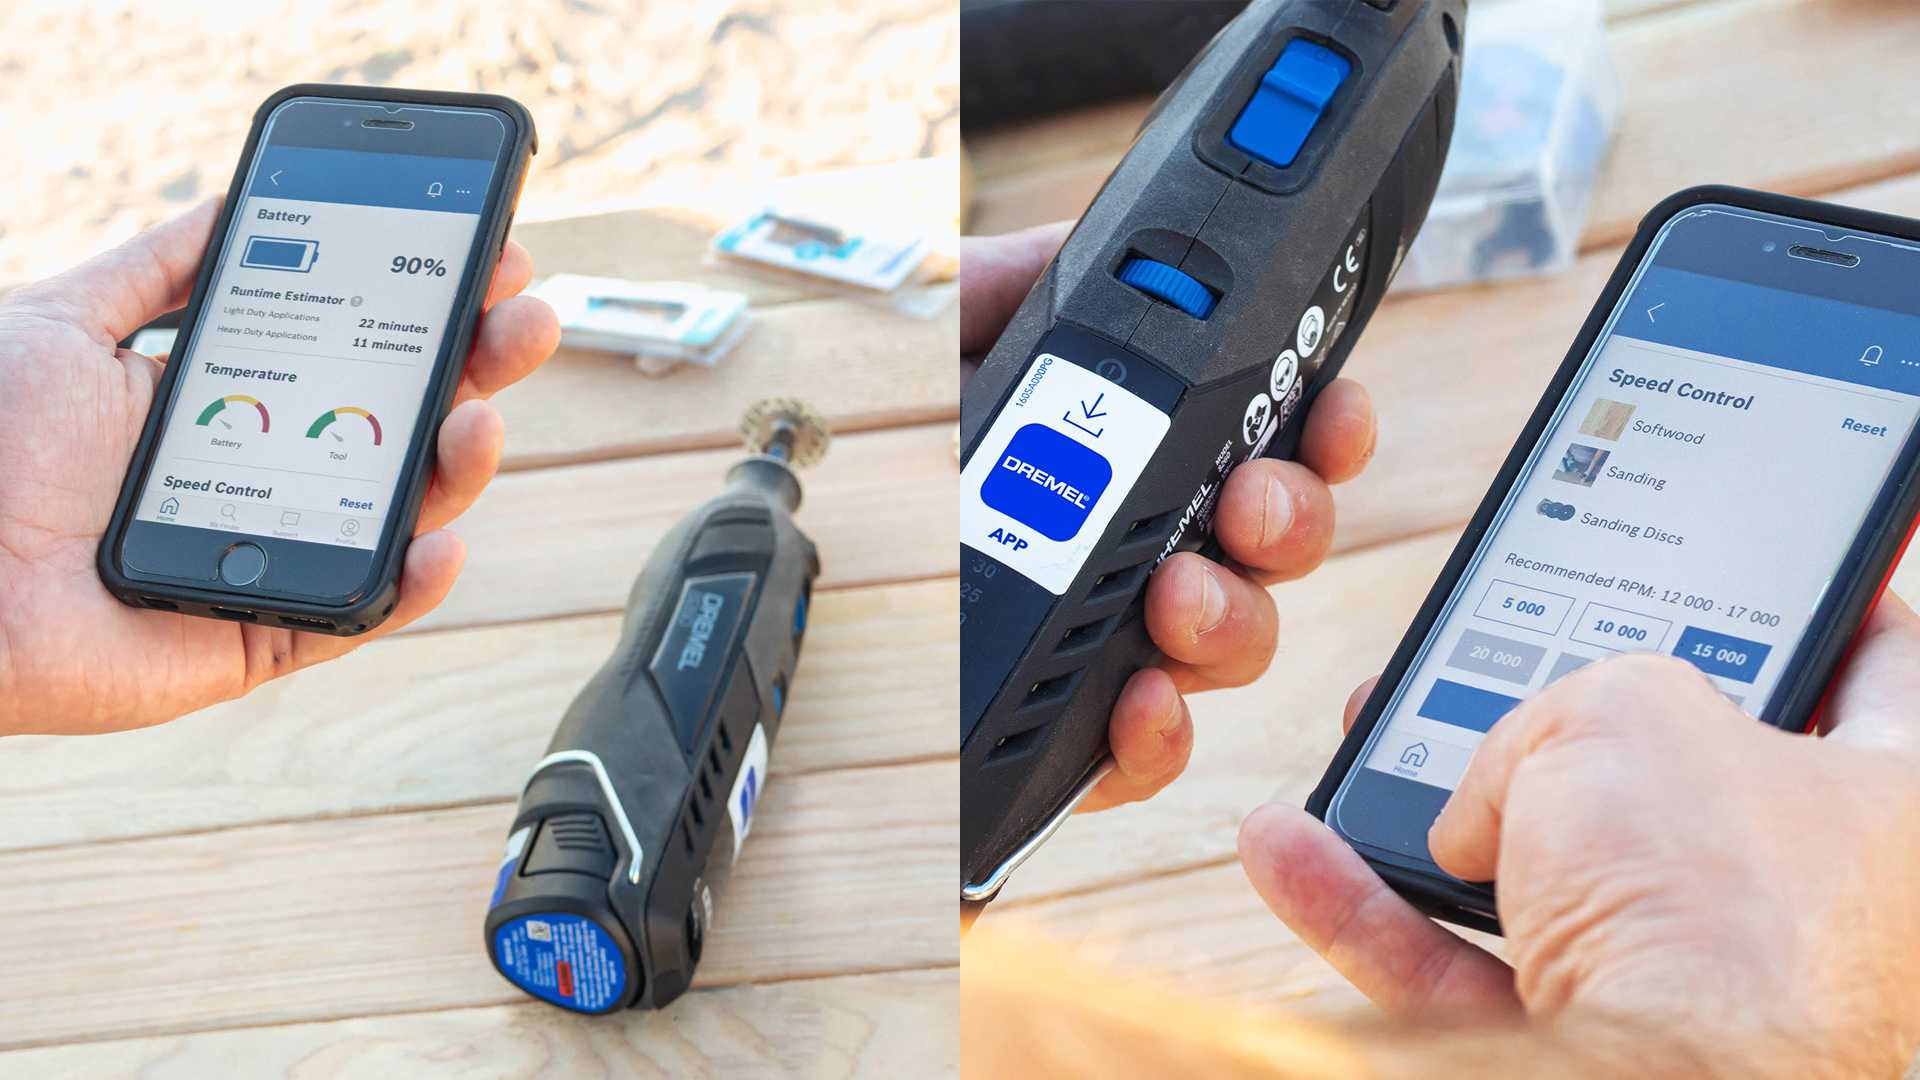 Connected products and solutions drive new opportunities: Entire Bosch braking portfolio now IoT-ready: The Dremel® brand, part of the Bosch Power Tools portfolio, unveiled the world’s first brushless smart rotary tool in late 2021. 